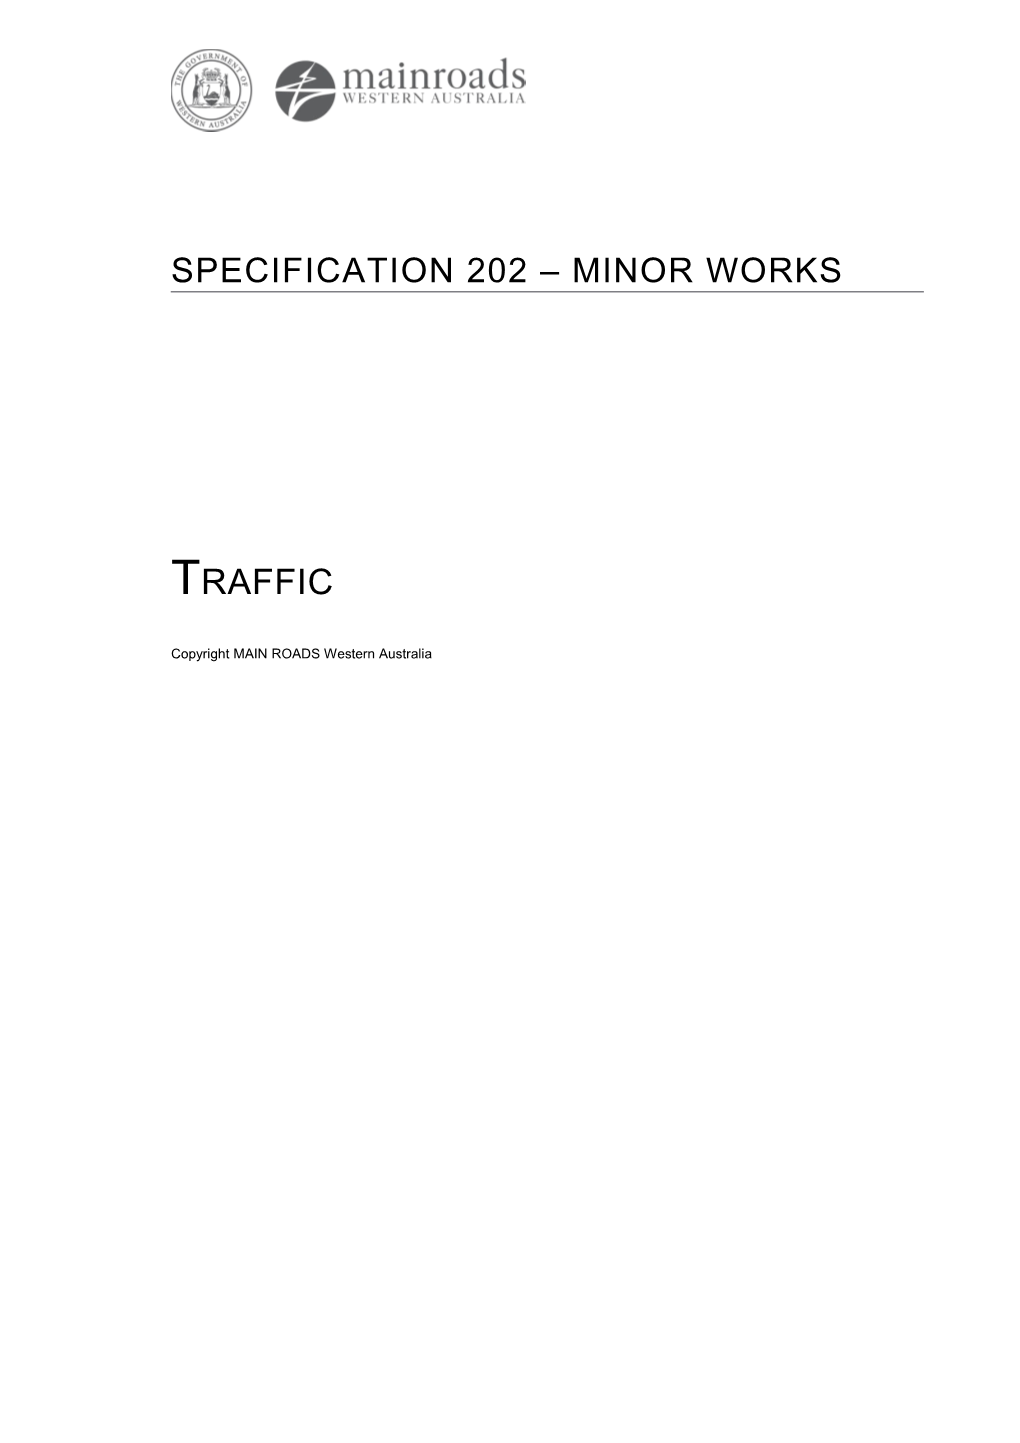 SPECIFICATION 202 Minor Works